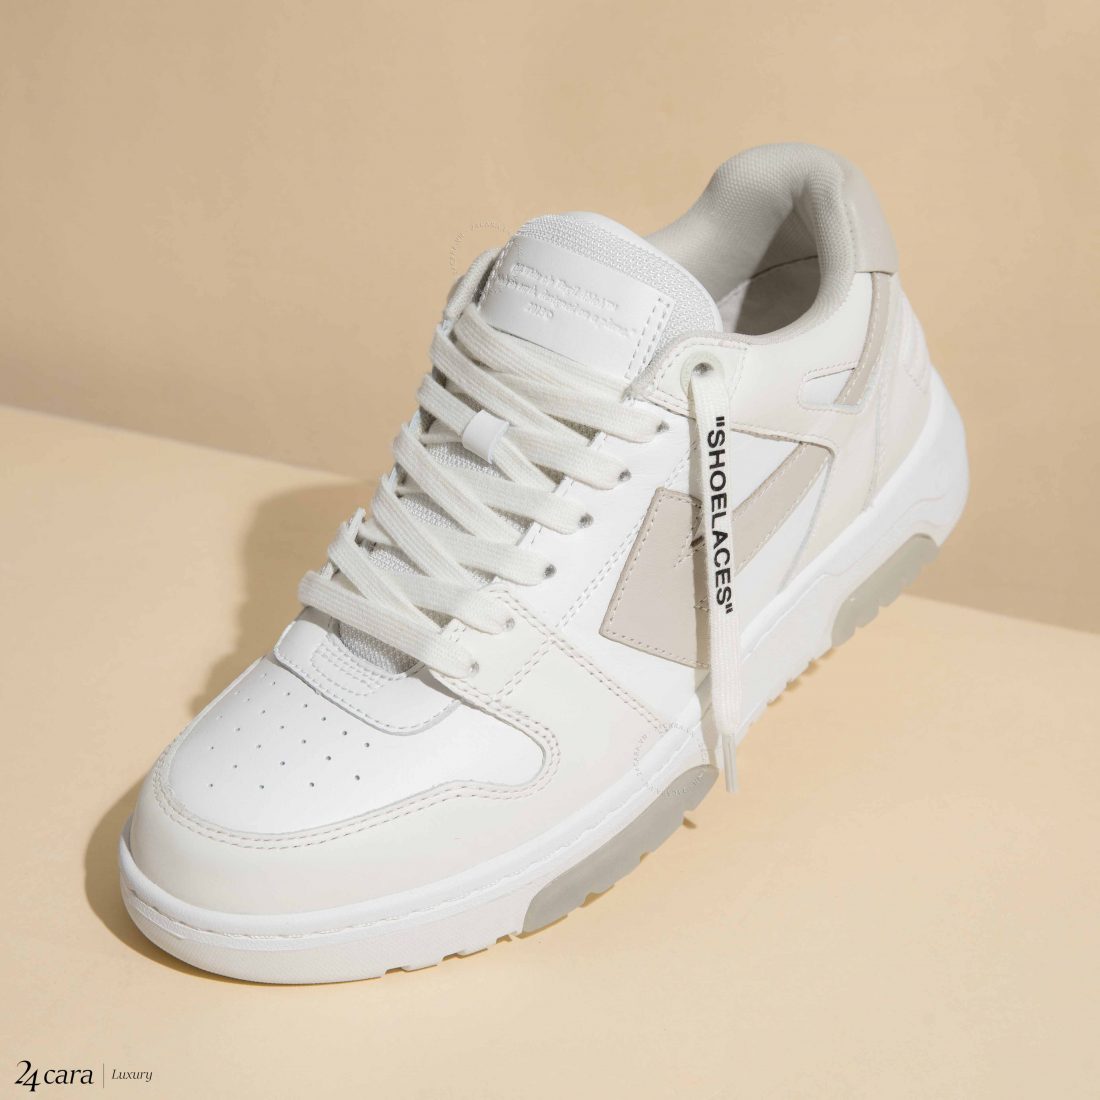 OFF WHITE OUT OF OFFICE “OOO” SNEAKER 24cara